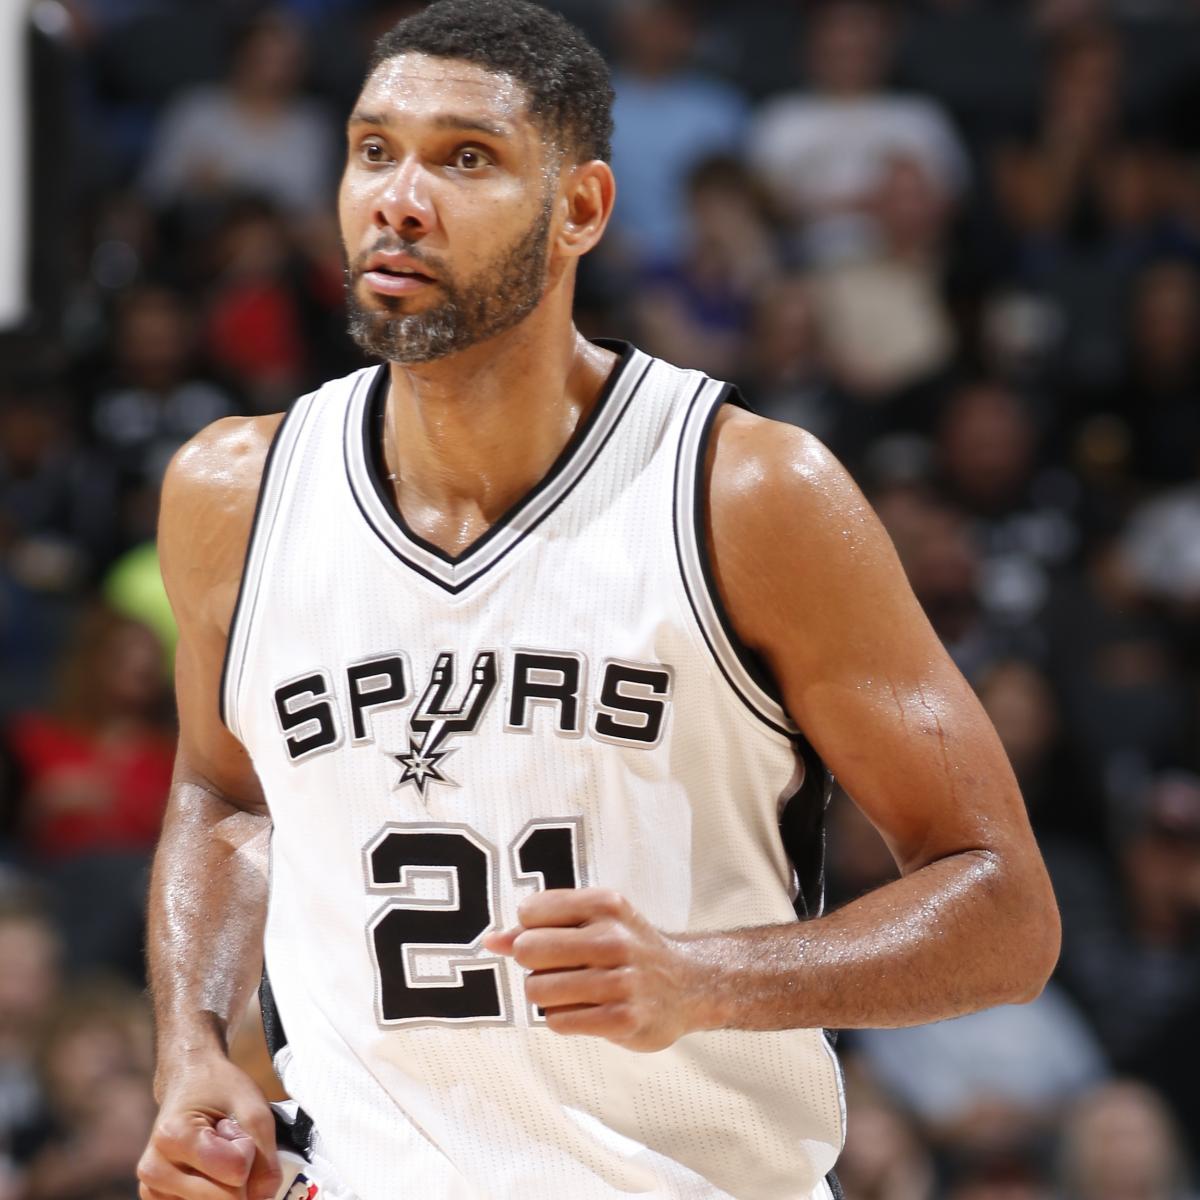 Spurs to retire Tim Duncan's jersey Dec. 18. Yes, he's going to